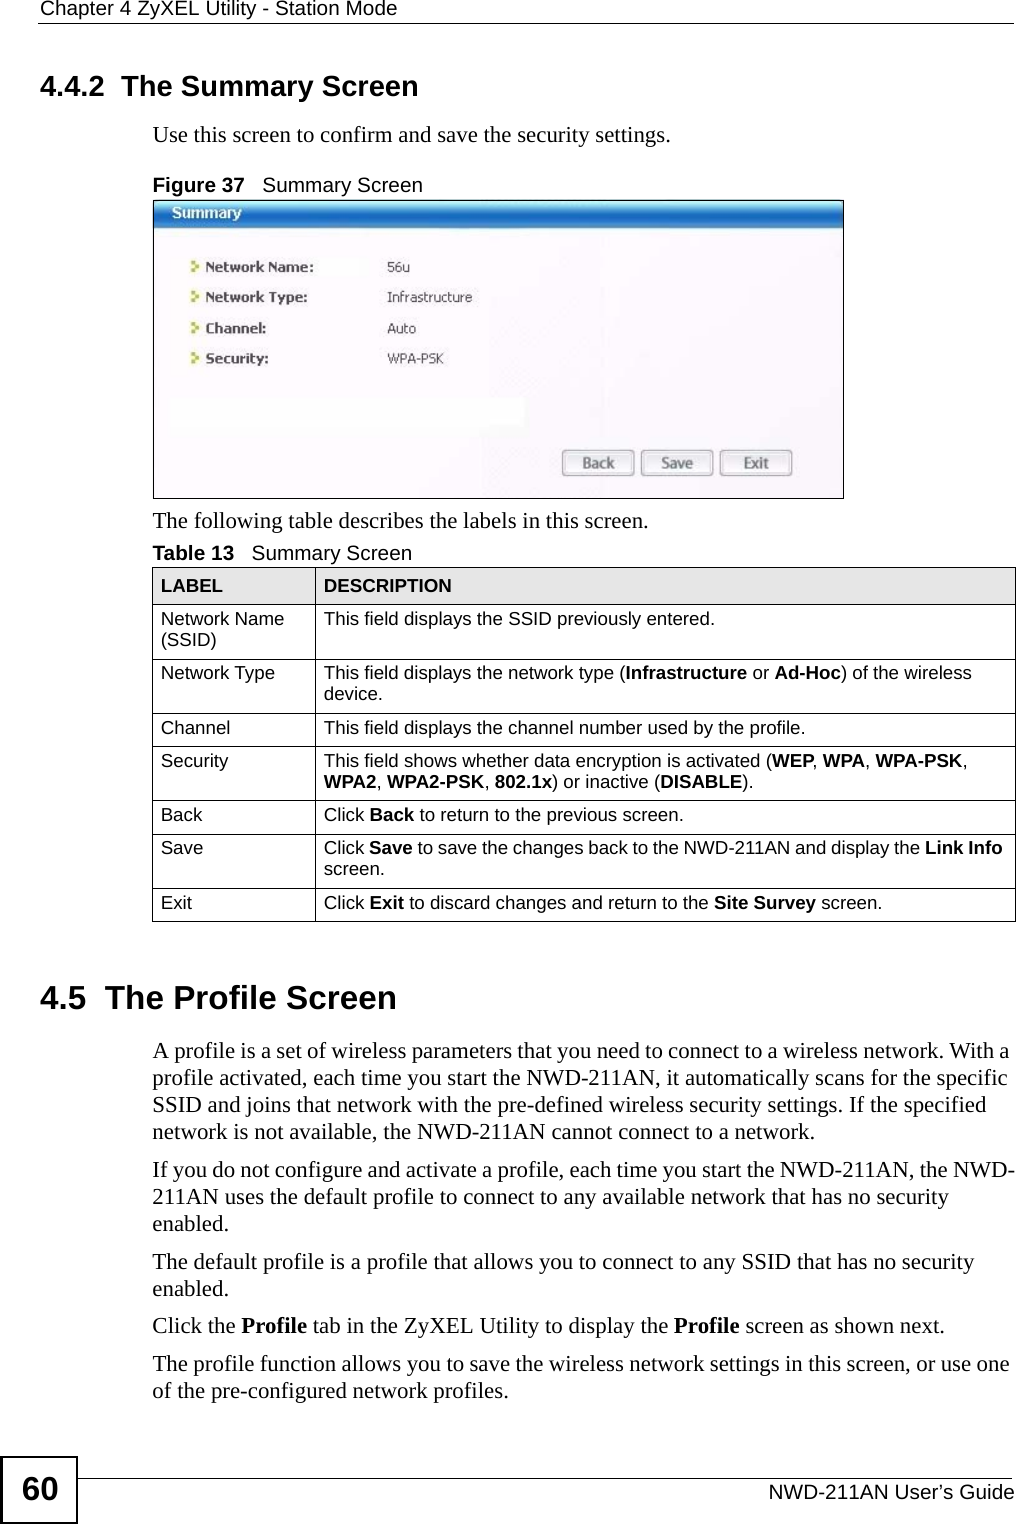 Chapter 4 ZyXEL Utility - Station ModeNWD-211AN User’s Guide604.4.2  The Summary ScreenUse this screen to confirm and save the security settings. Figure 37   Summary Screen The following table describes the labels in this screen.     4.5  The Profile Screen A profile is a set of wireless parameters that you need to connect to a wireless network. With a profile activated, each time you start the NWD-211AN, it automatically scans for the specific SSID and joins that network with the pre-defined wireless security settings. If the specified network is not available, the NWD-211AN cannot connect to a network.If you do not configure and activate a profile, each time you start the NWD-211AN, the NWD-211AN uses the default profile to connect to any available network that has no security enabled. The default profile is a profile that allows you to connect to any SSID that has no security enabled. Click the Profile tab in the ZyXEL Utility to display the Profile screen as shown next.The profile function allows you to save the wireless network settings in this screen, or use one of the pre-configured network profiles.Table 13   Summary ScreenLABEL DESCRIPTIONNetwork Name (SSID) This field displays the SSID previously entered.Network Type This field displays the network type (Infrastructure or Ad-Hoc) of the wireless device.Channel This field displays the channel number used by the profile.Security This field shows whether data encryption is activated (WEP, WPA, WPA-PSK, WPA2, WPA2-PSK, 802.1x) or inactive (DISABLE).Back Click Back to return to the previous screen.Save Click Save to save the changes back to the NWD-211AN and display the Link Info screen. Exit Click Exit to discard changes and return to the Site Survey screen.